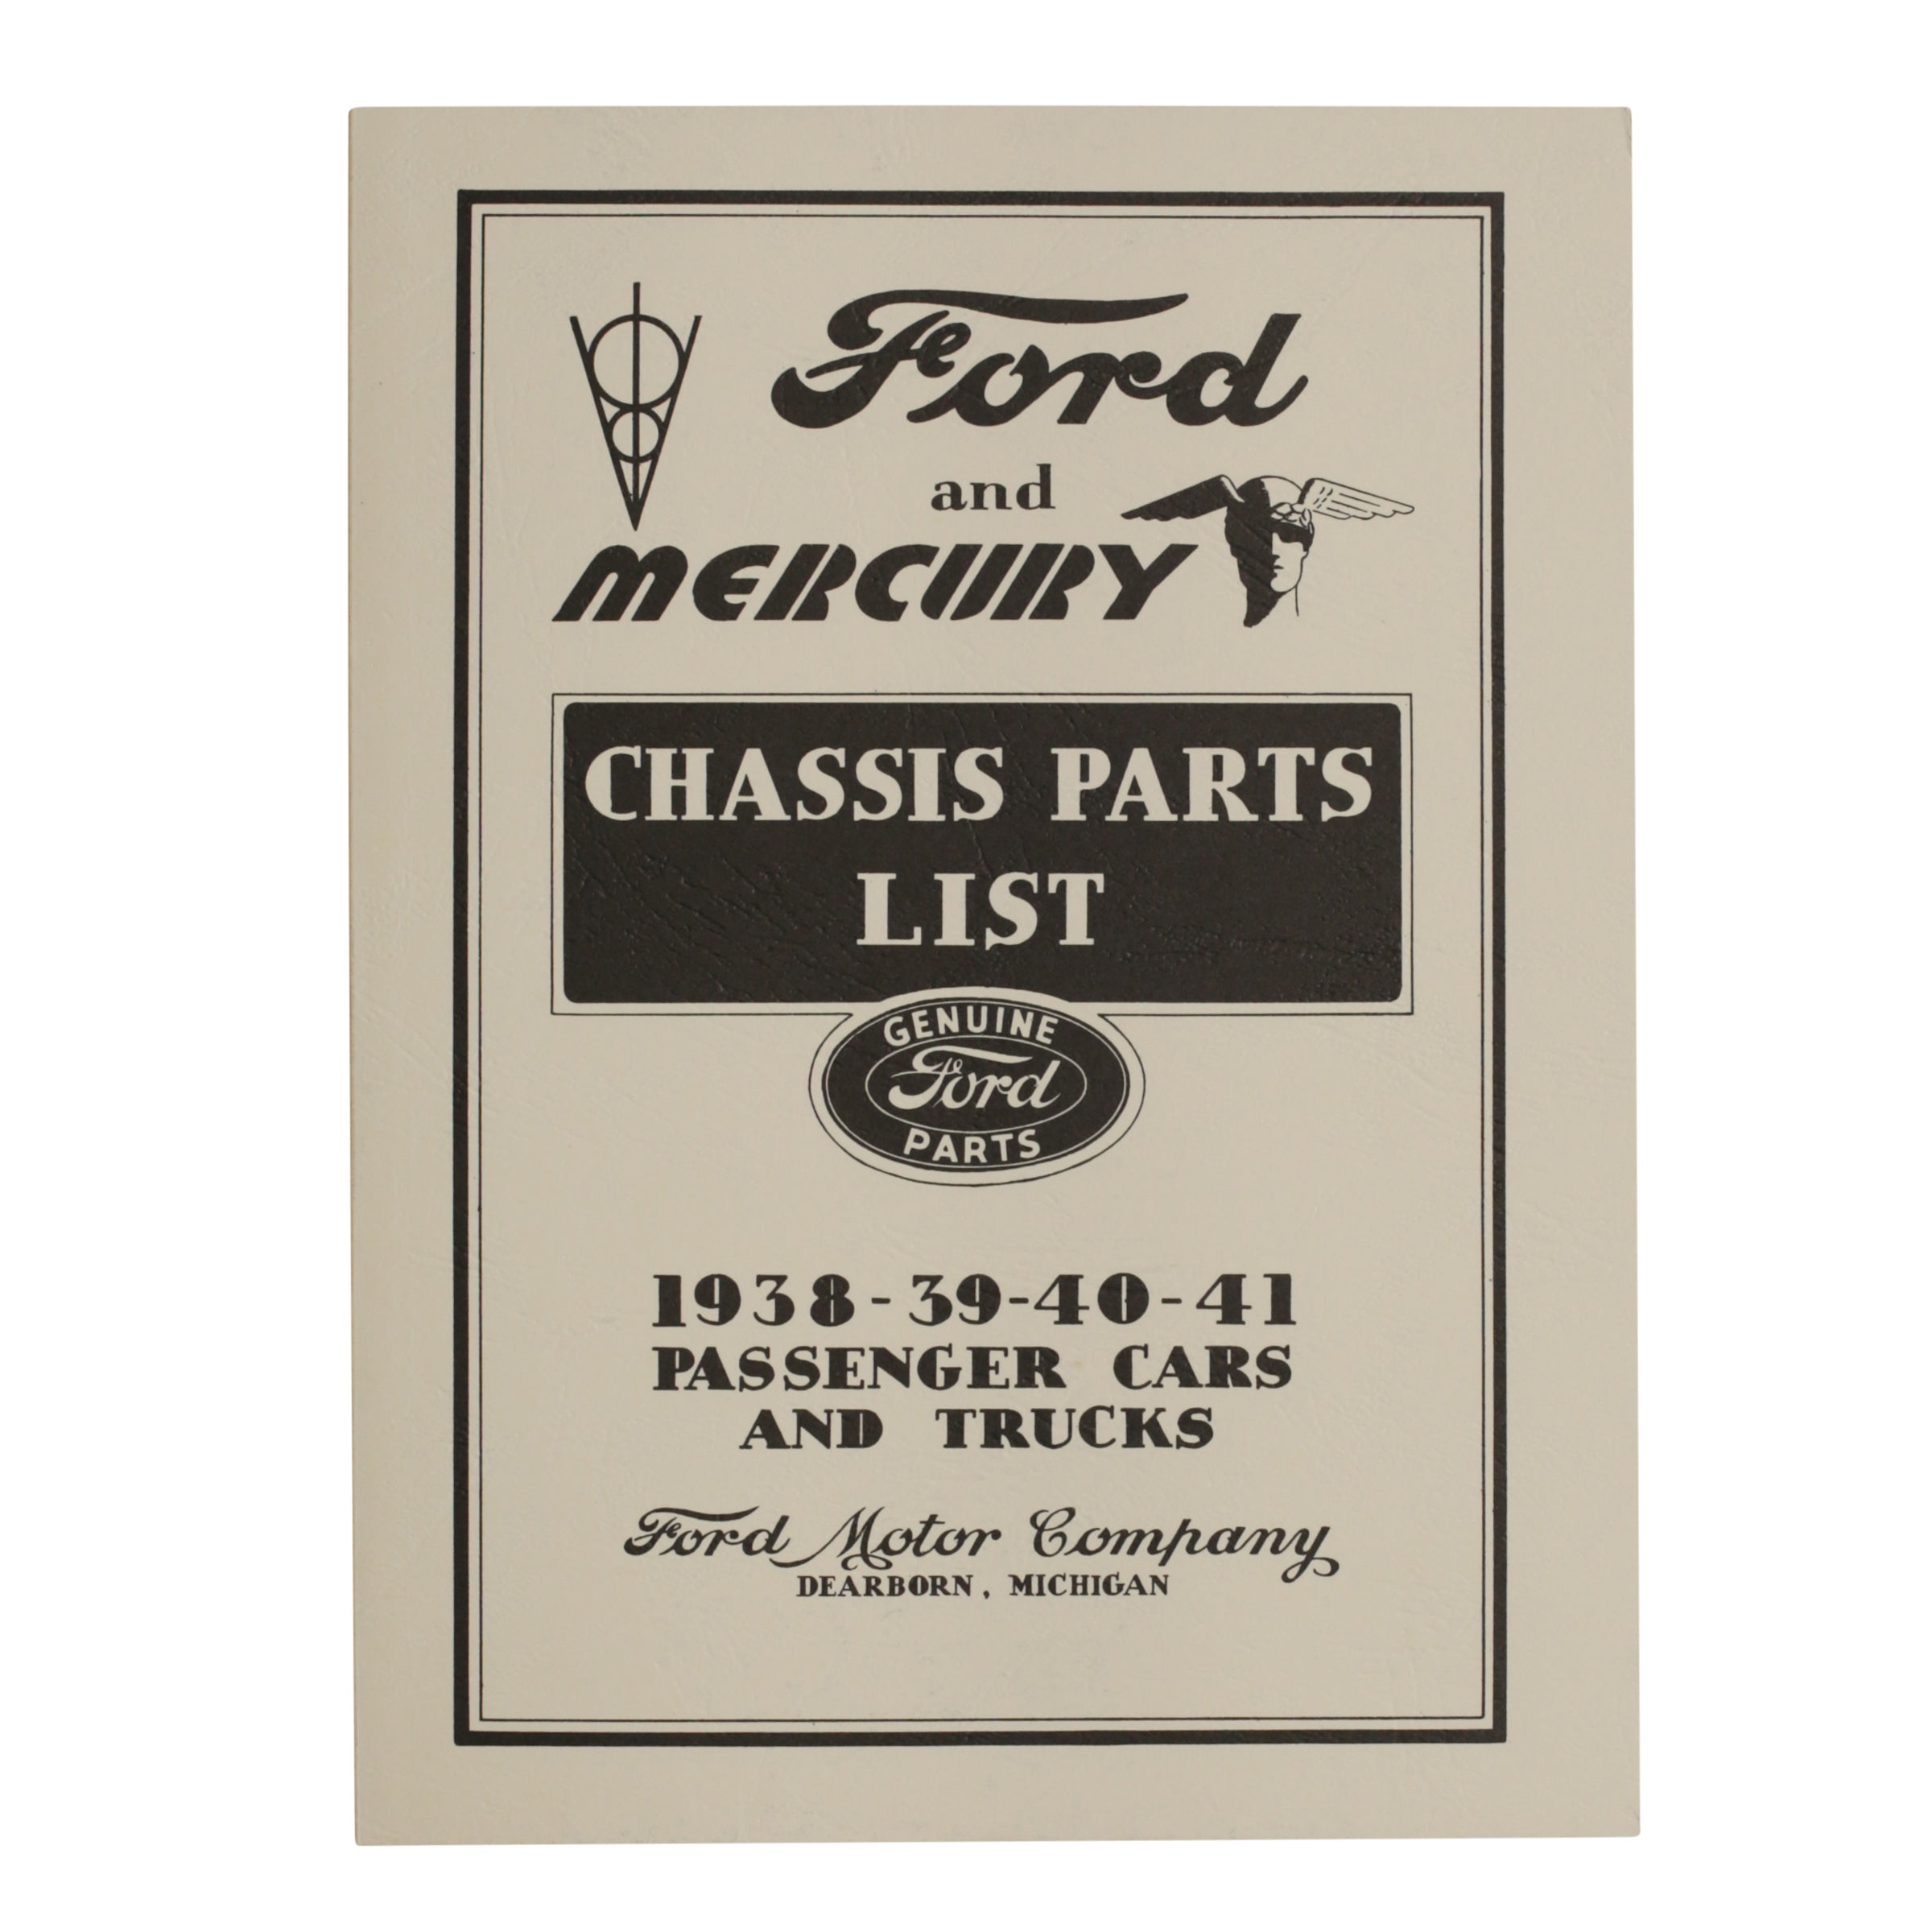 Ford Chassis Parts List • 1938-41 Ford